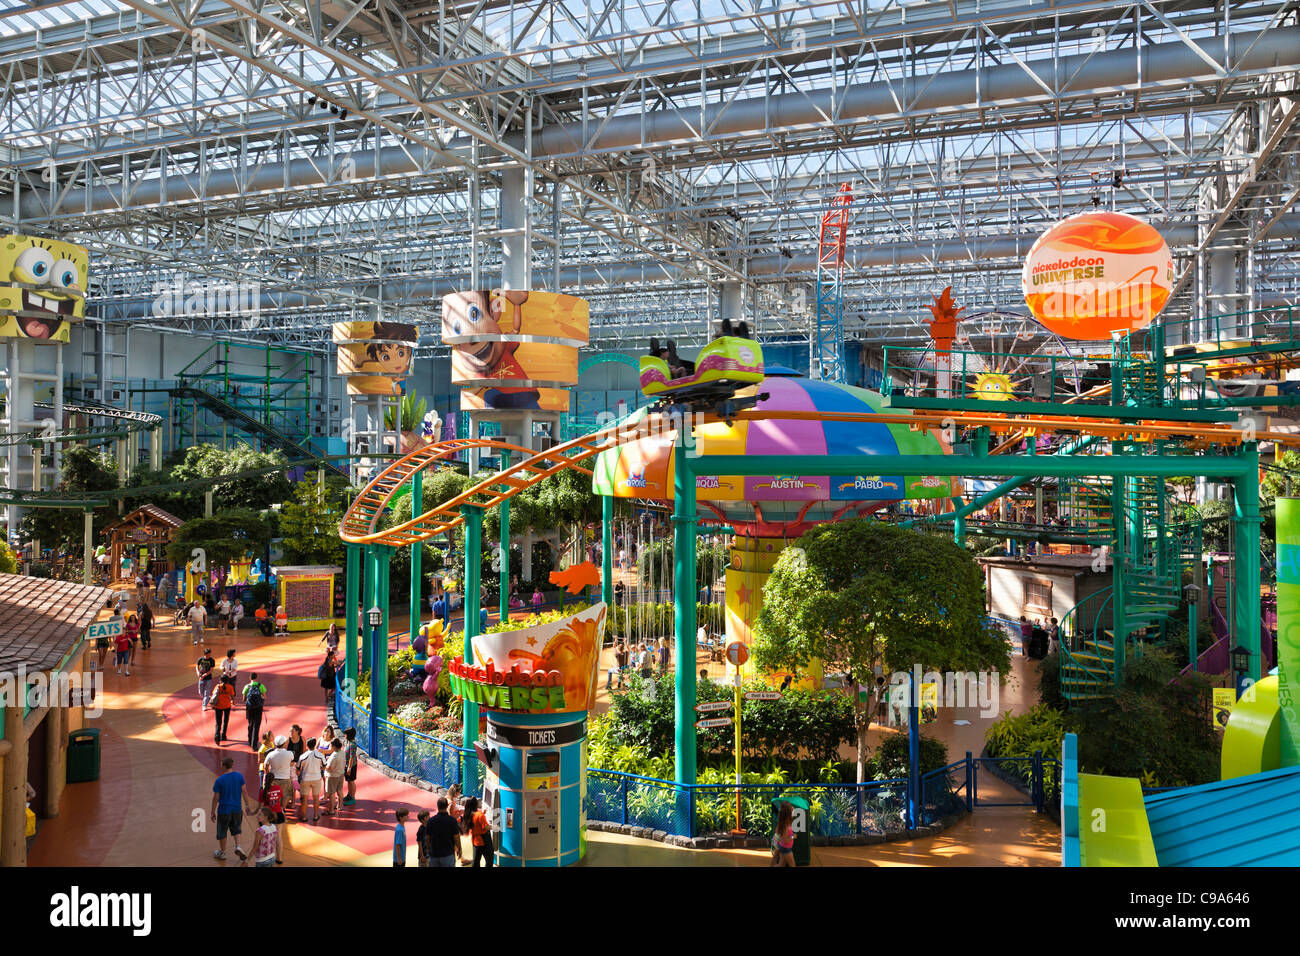 Mall of America Family Fun: Theme Park, Sharks and Stores - Metro